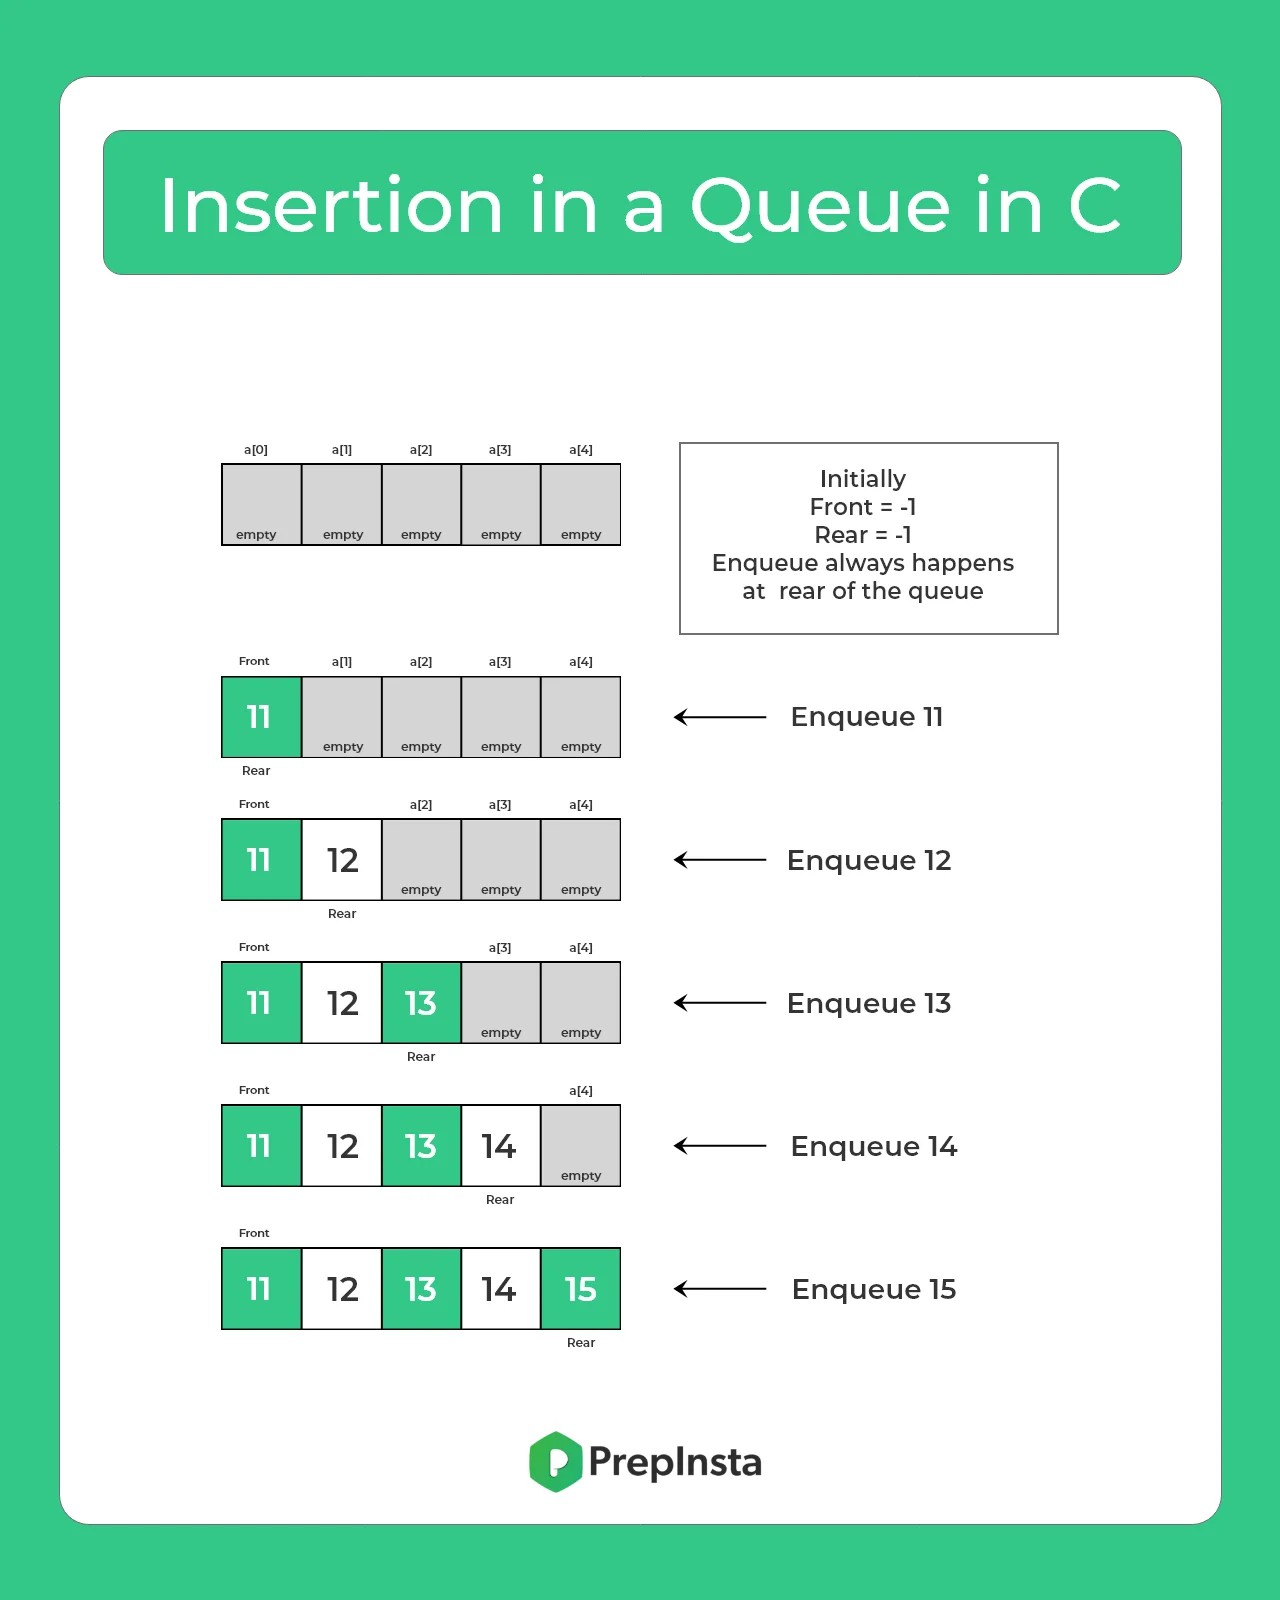 Insertion in a queue in C